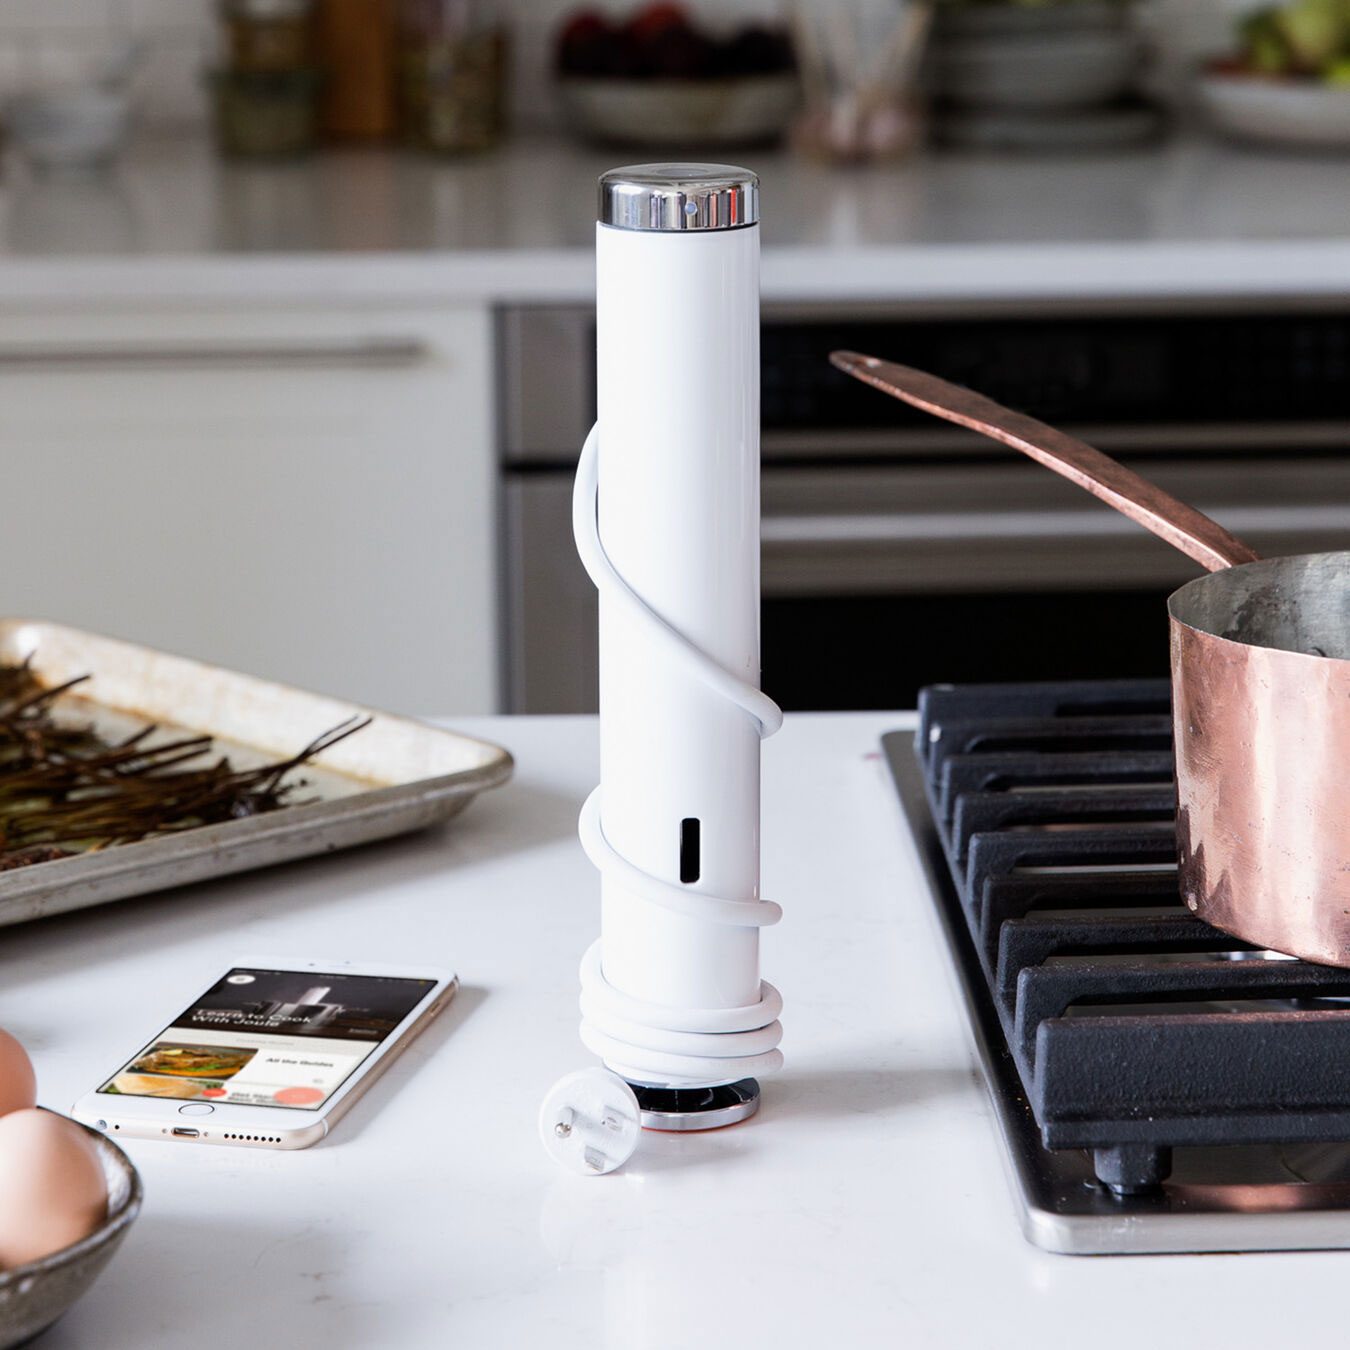 Joule Review: Is It Worth The Cost For Sous Vide?